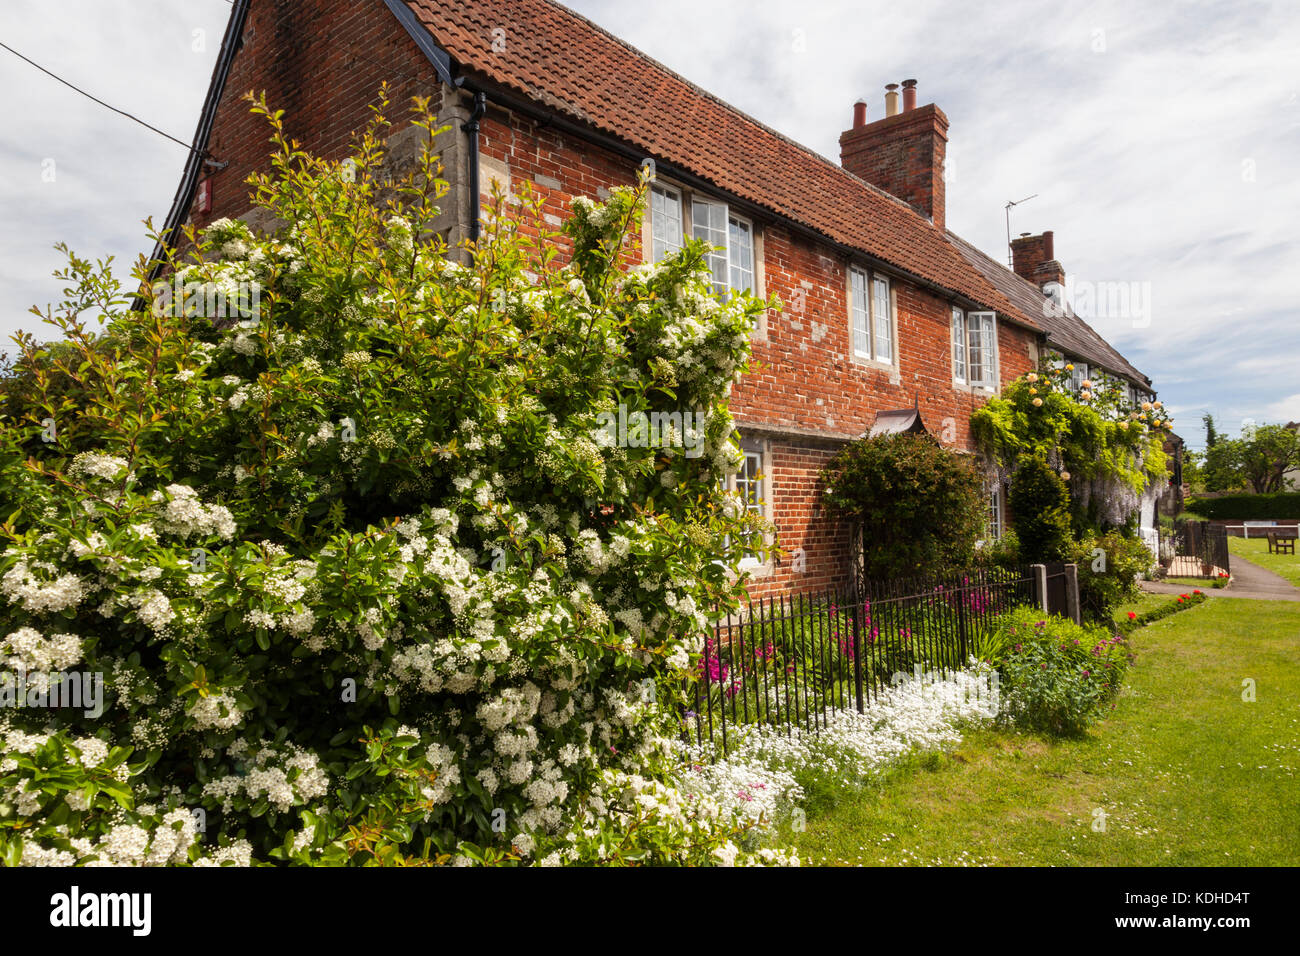 Cottages in the village of Steeple Ashton, Wiltshire, England, UK Stock Photo